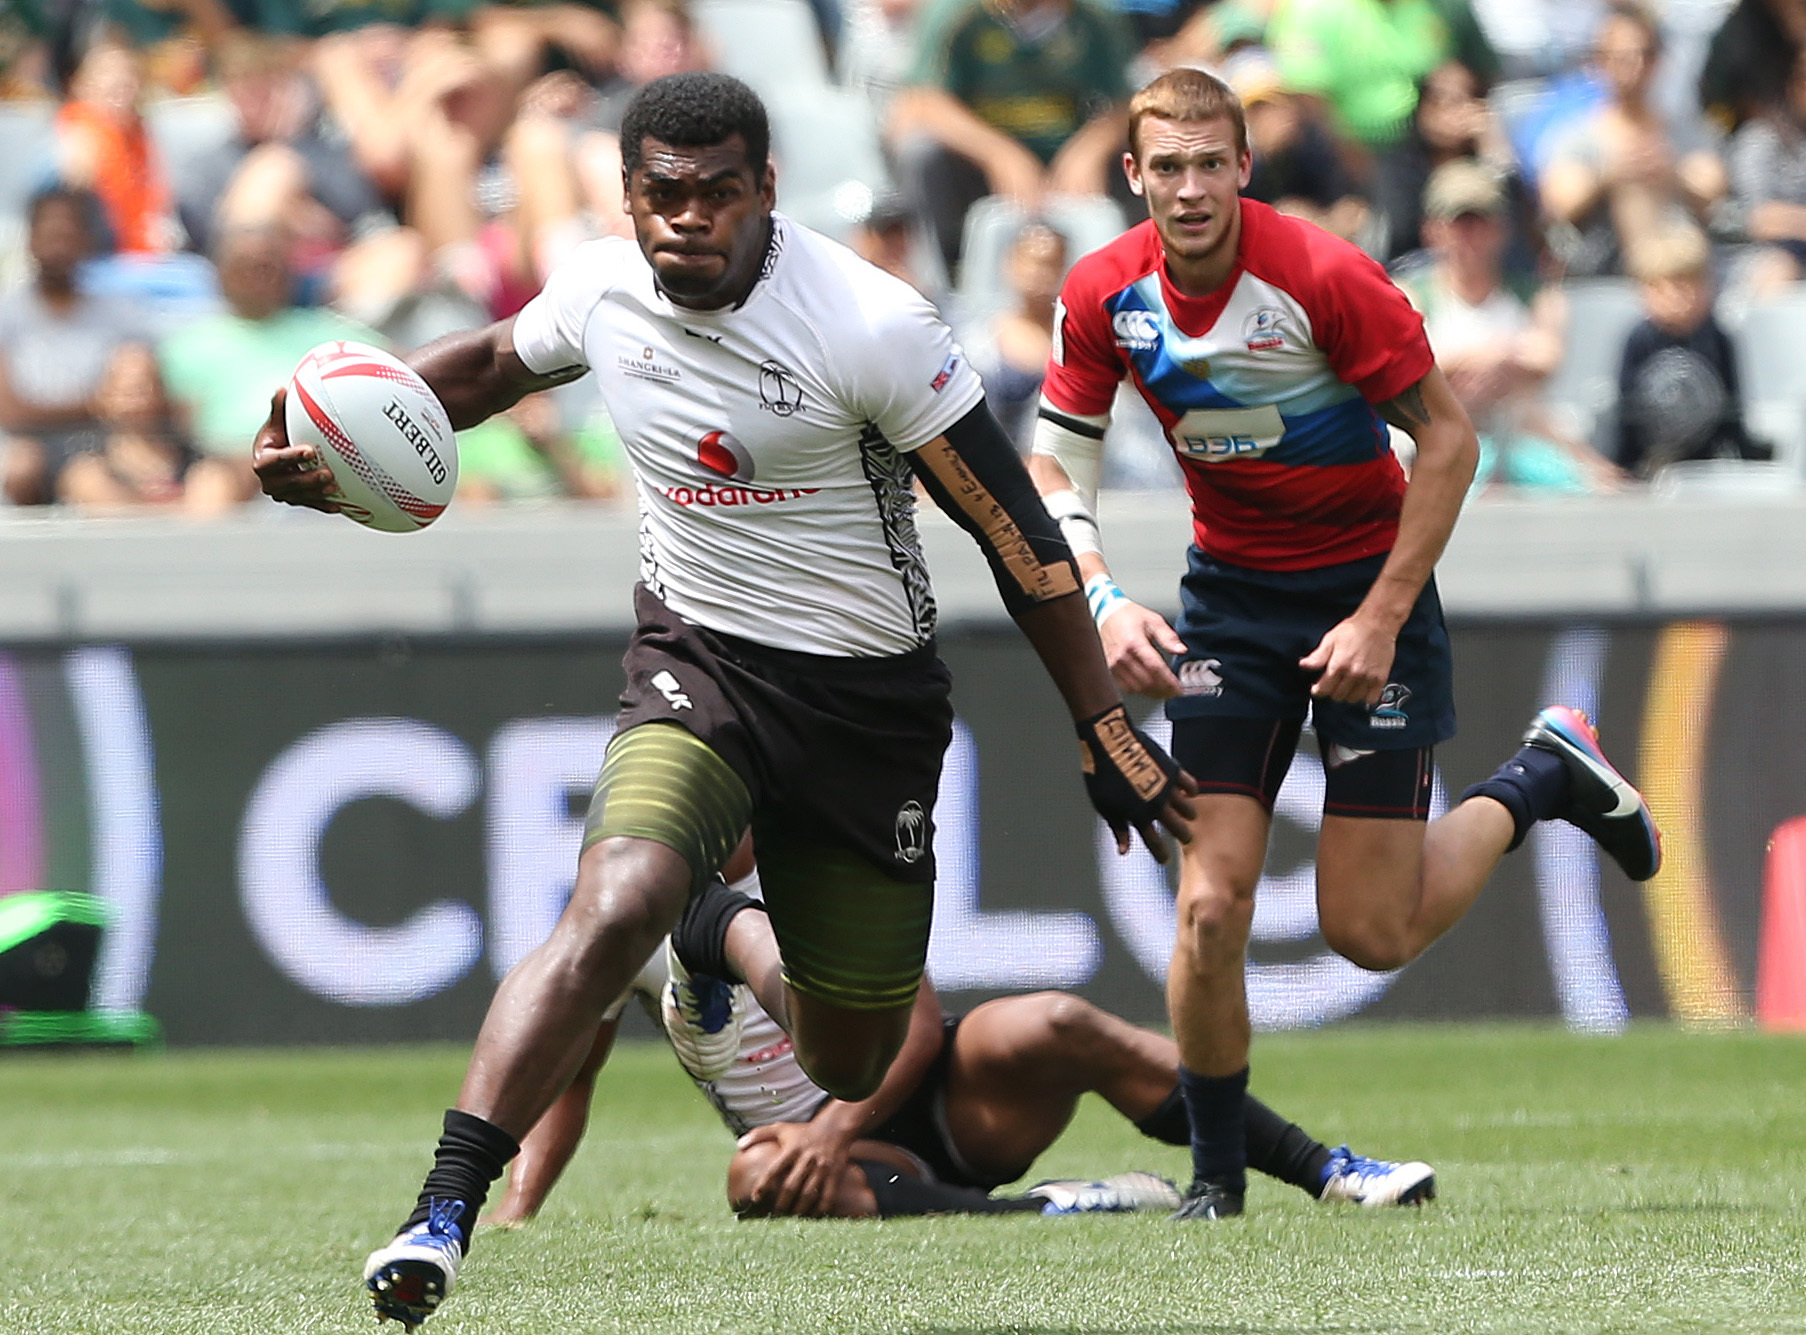 Viliame Mata was a star for Fiji in the World 7s and at the Olympics.